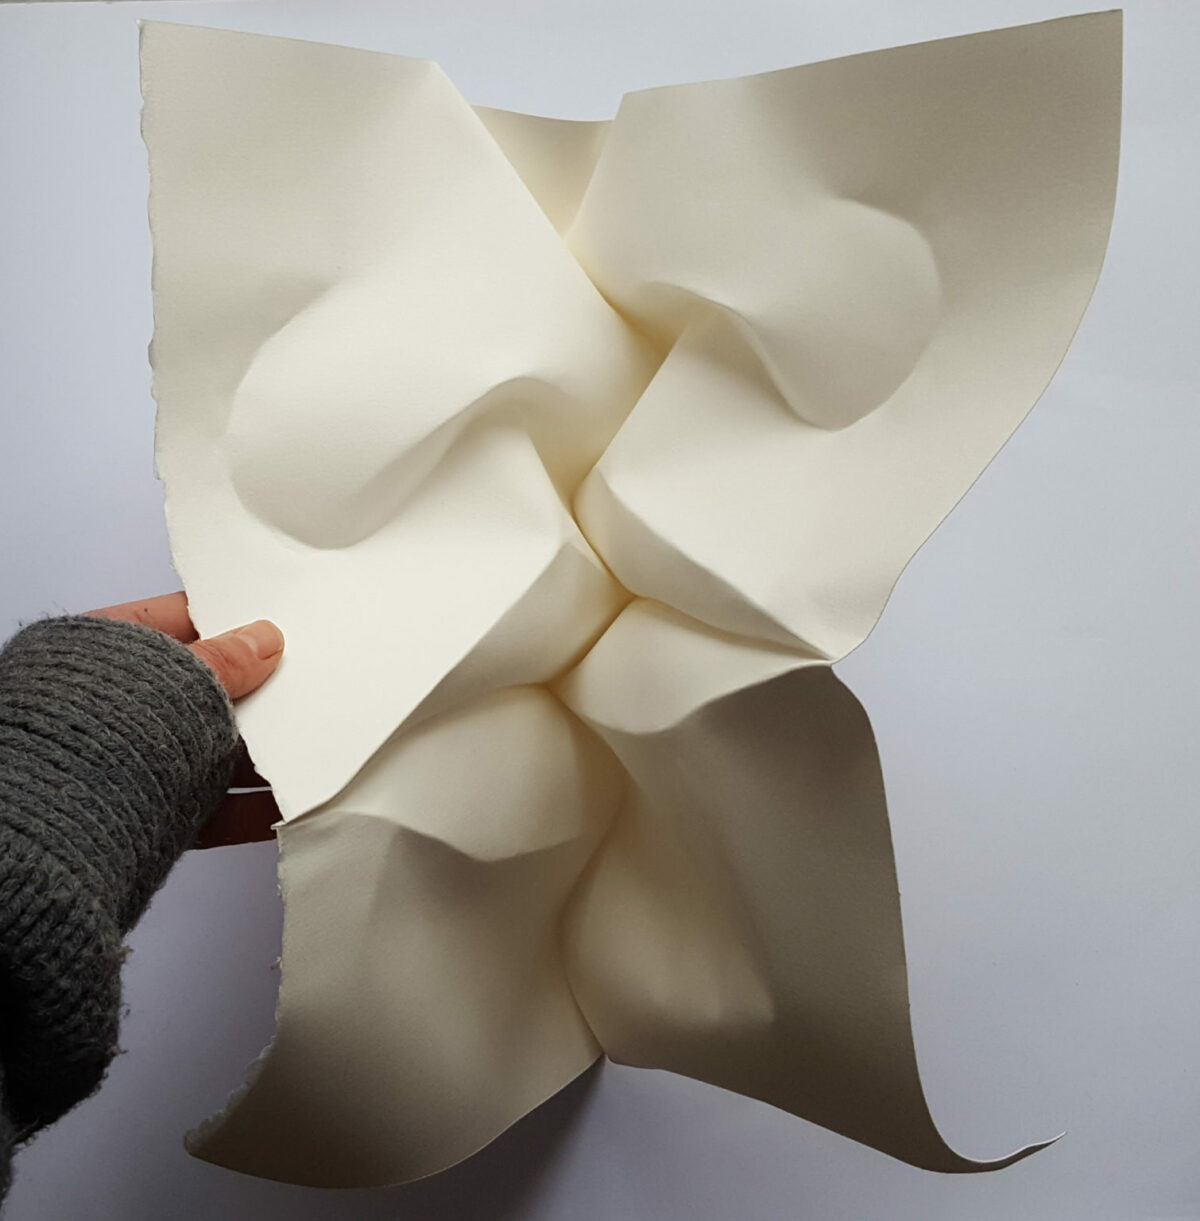 Fascinating Facial Sculptures Made From Folded Paper Sheets By Polly Verity (12)